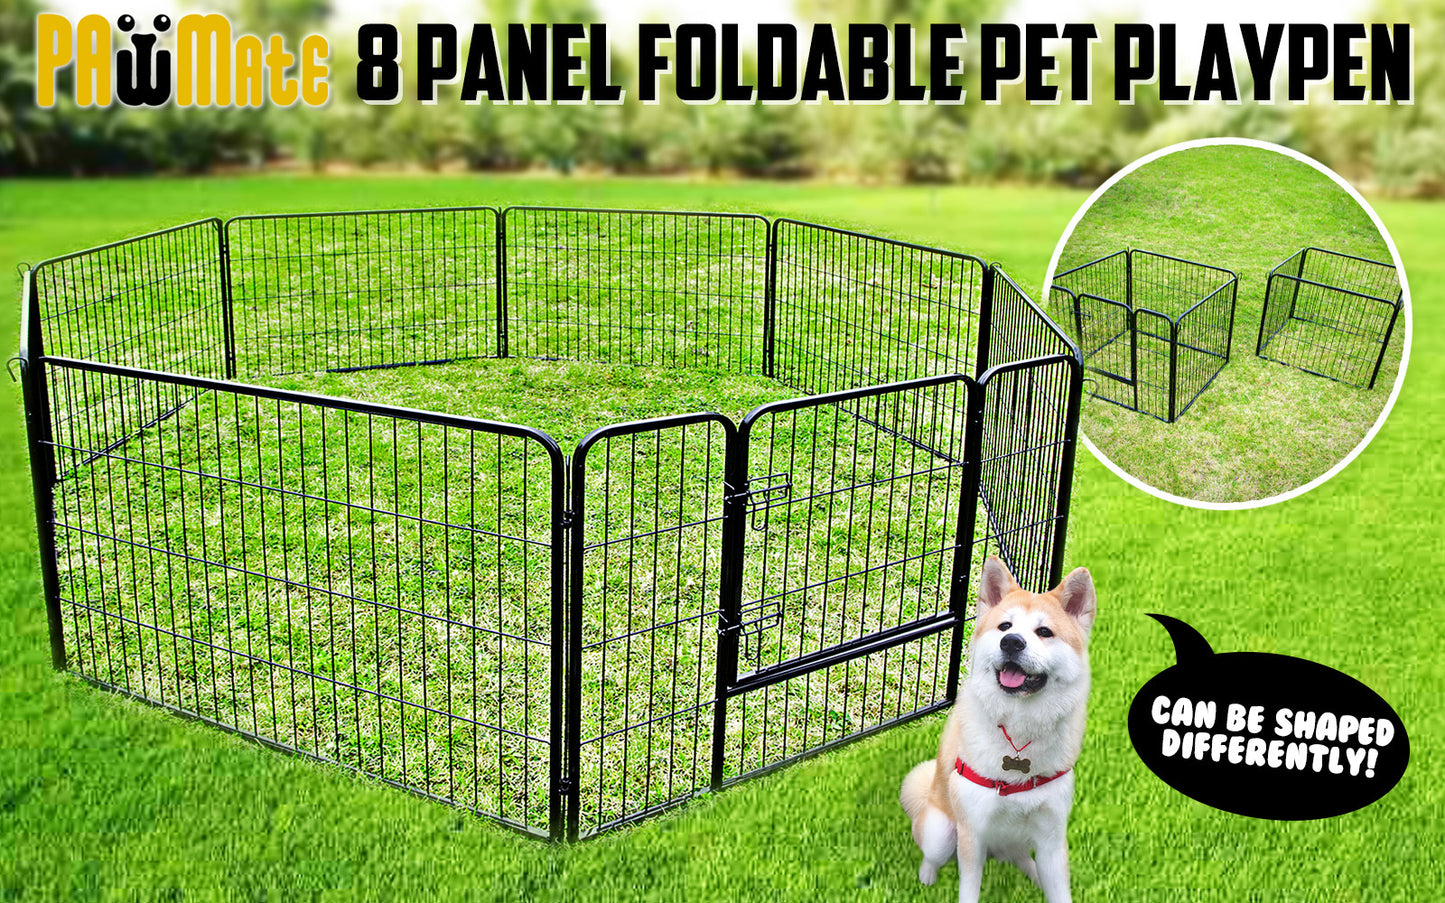 Pet Playpen Heavy Duty 32in 8 Panel Foldable Dog Exercise Enclosure Fence Cage - image2